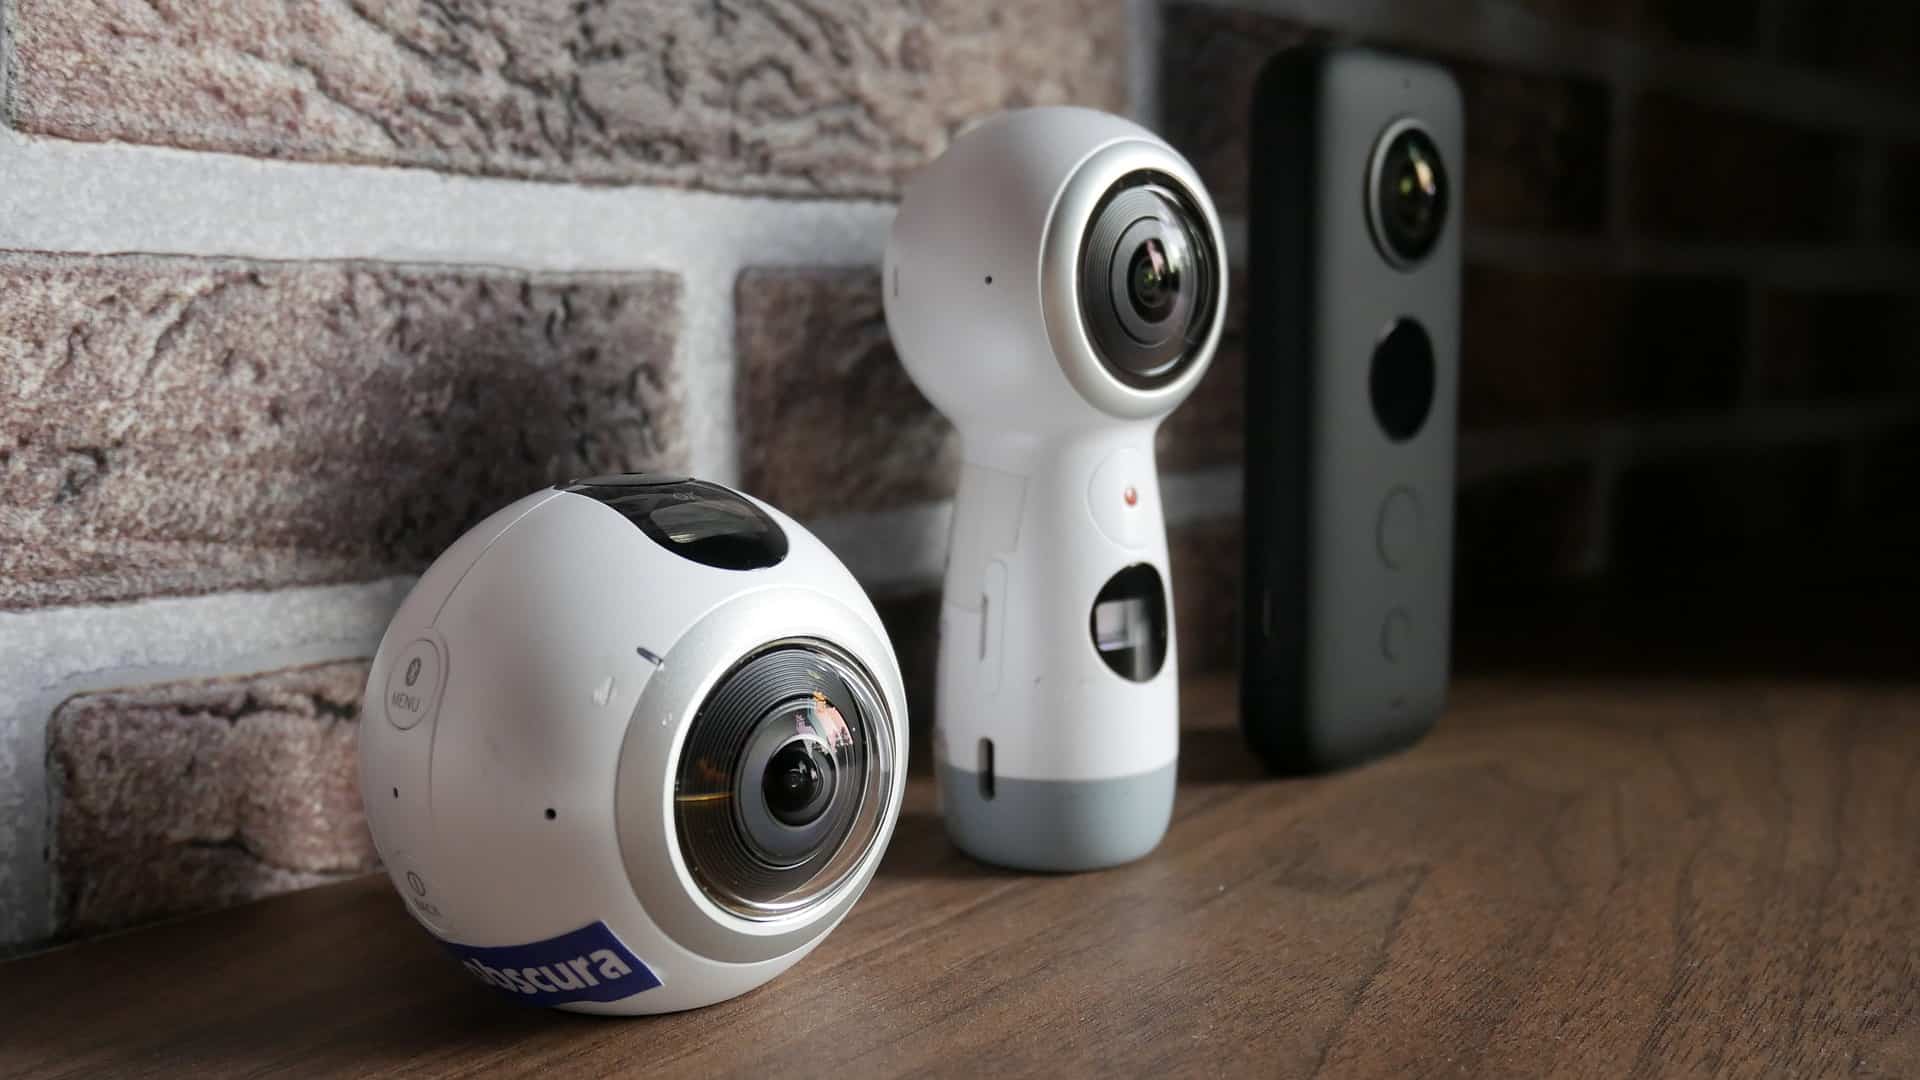 Three 360 cameras lined up on a wooden surface.